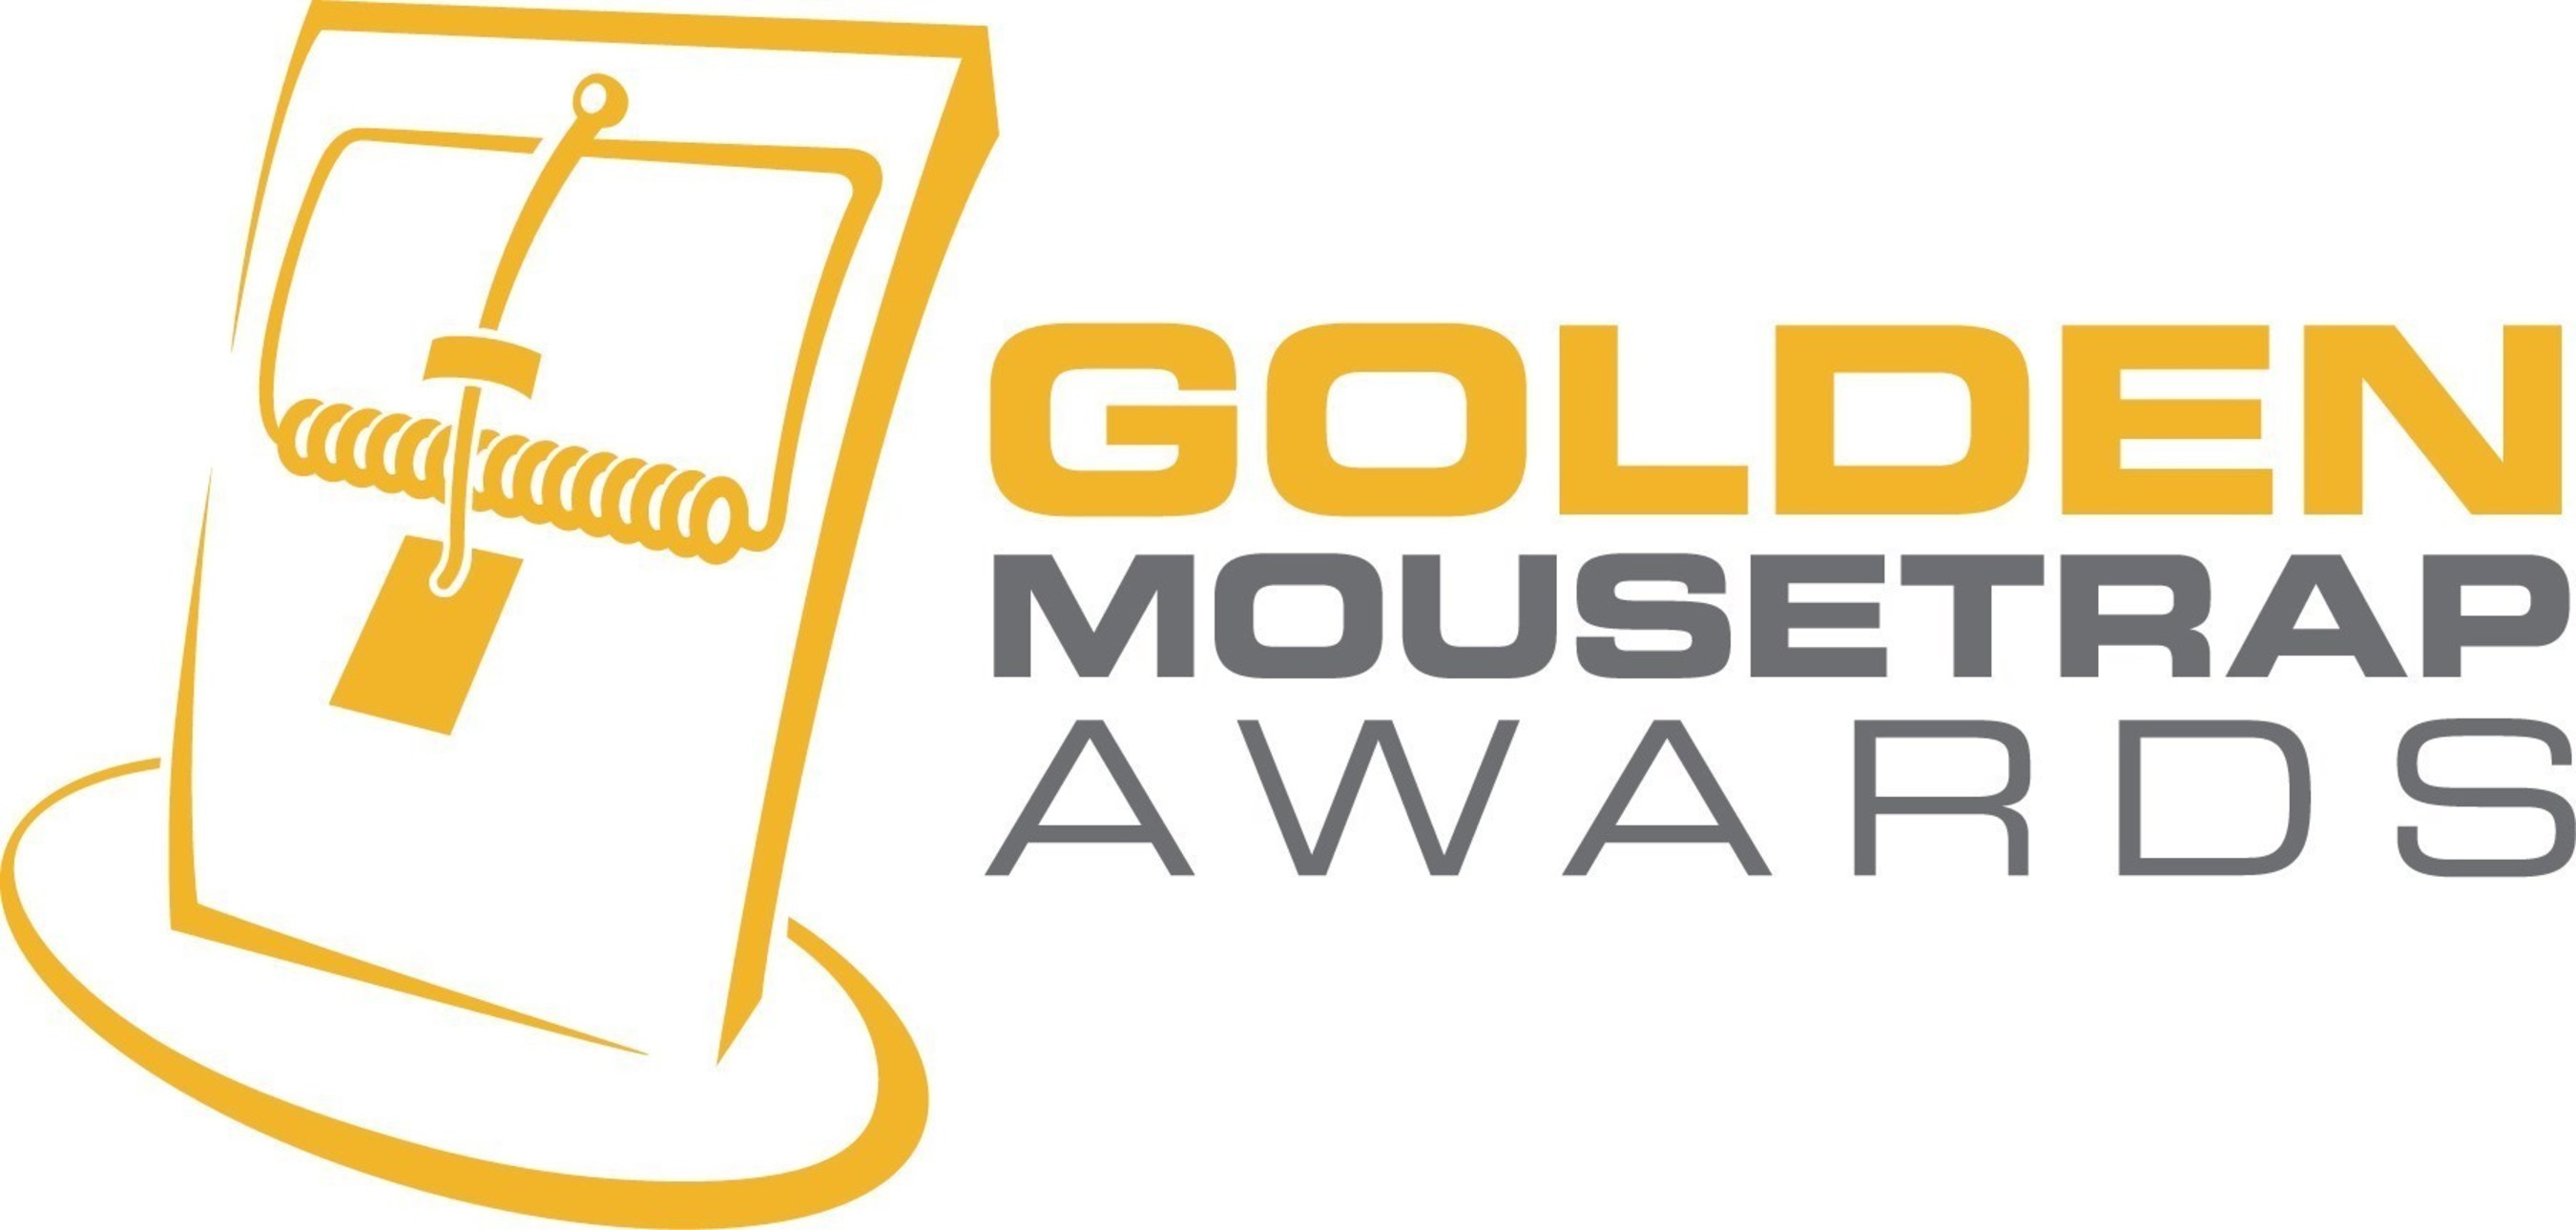 2016 Golden Mousetrap Award Winners Announced at Ceremony Celebrating Top Advancements in Product Design and Manufacturing